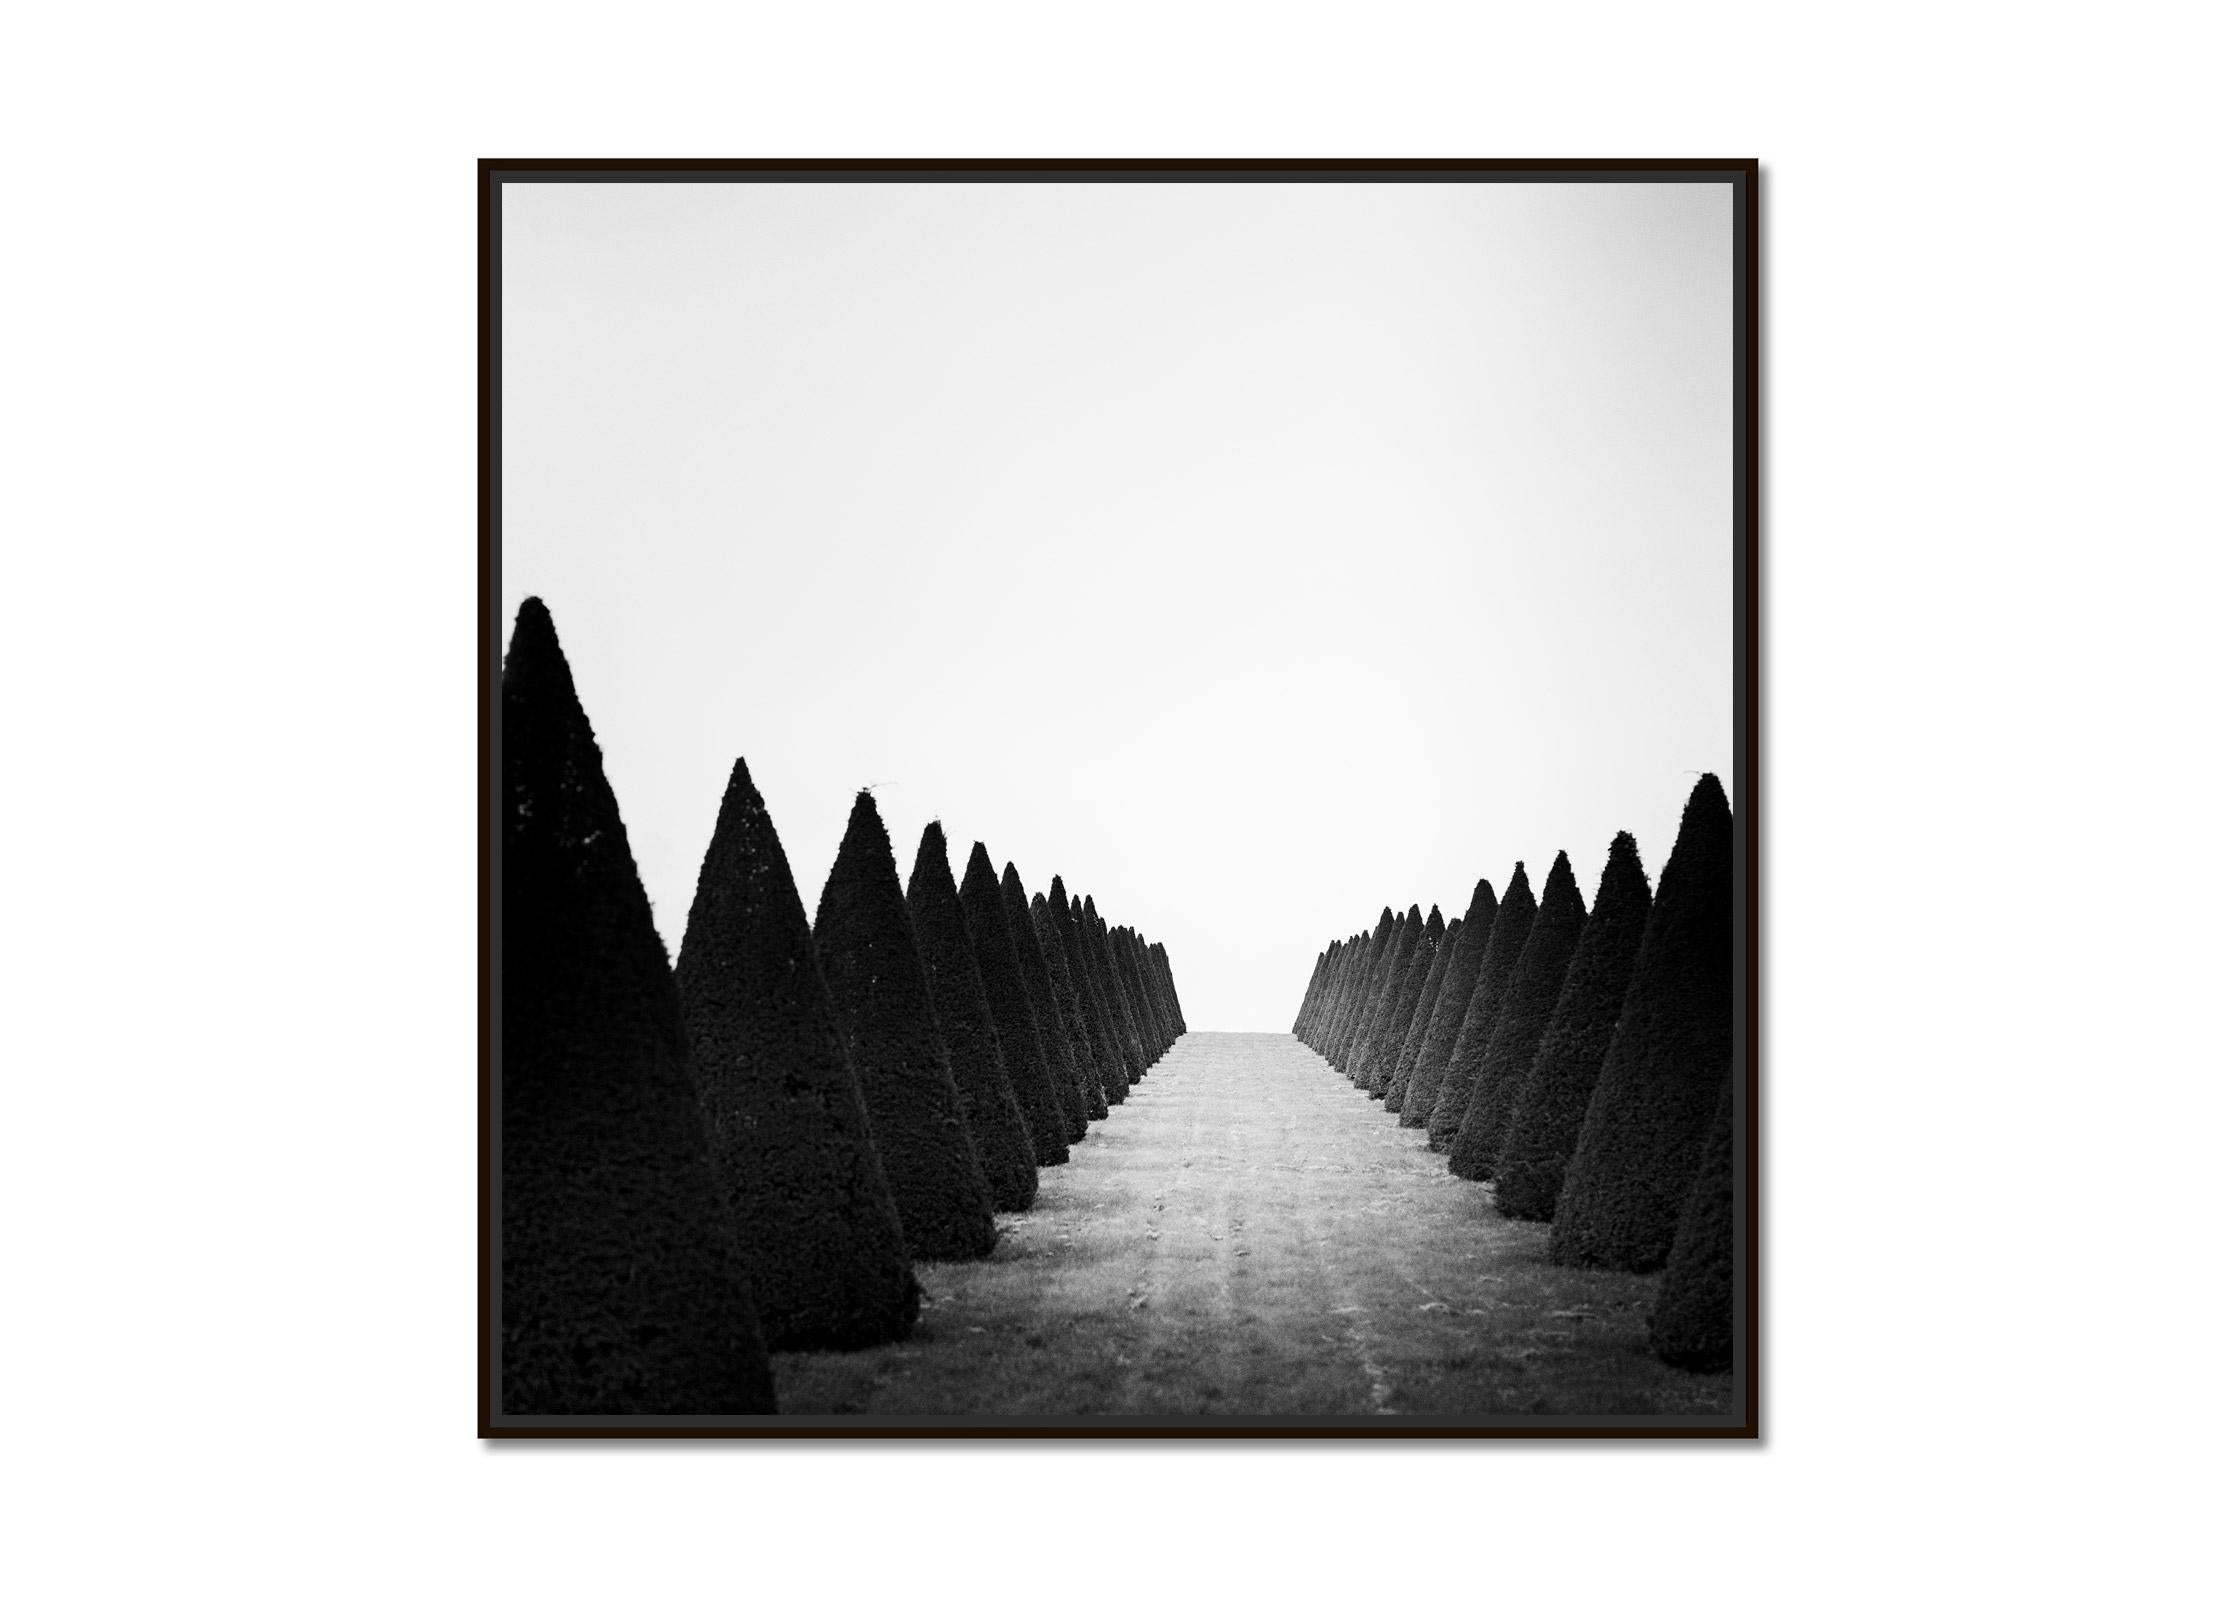 Hedges, Palace of Versailles, Paris, black and white photography, landscape - Photograph by Gerald Berghammer